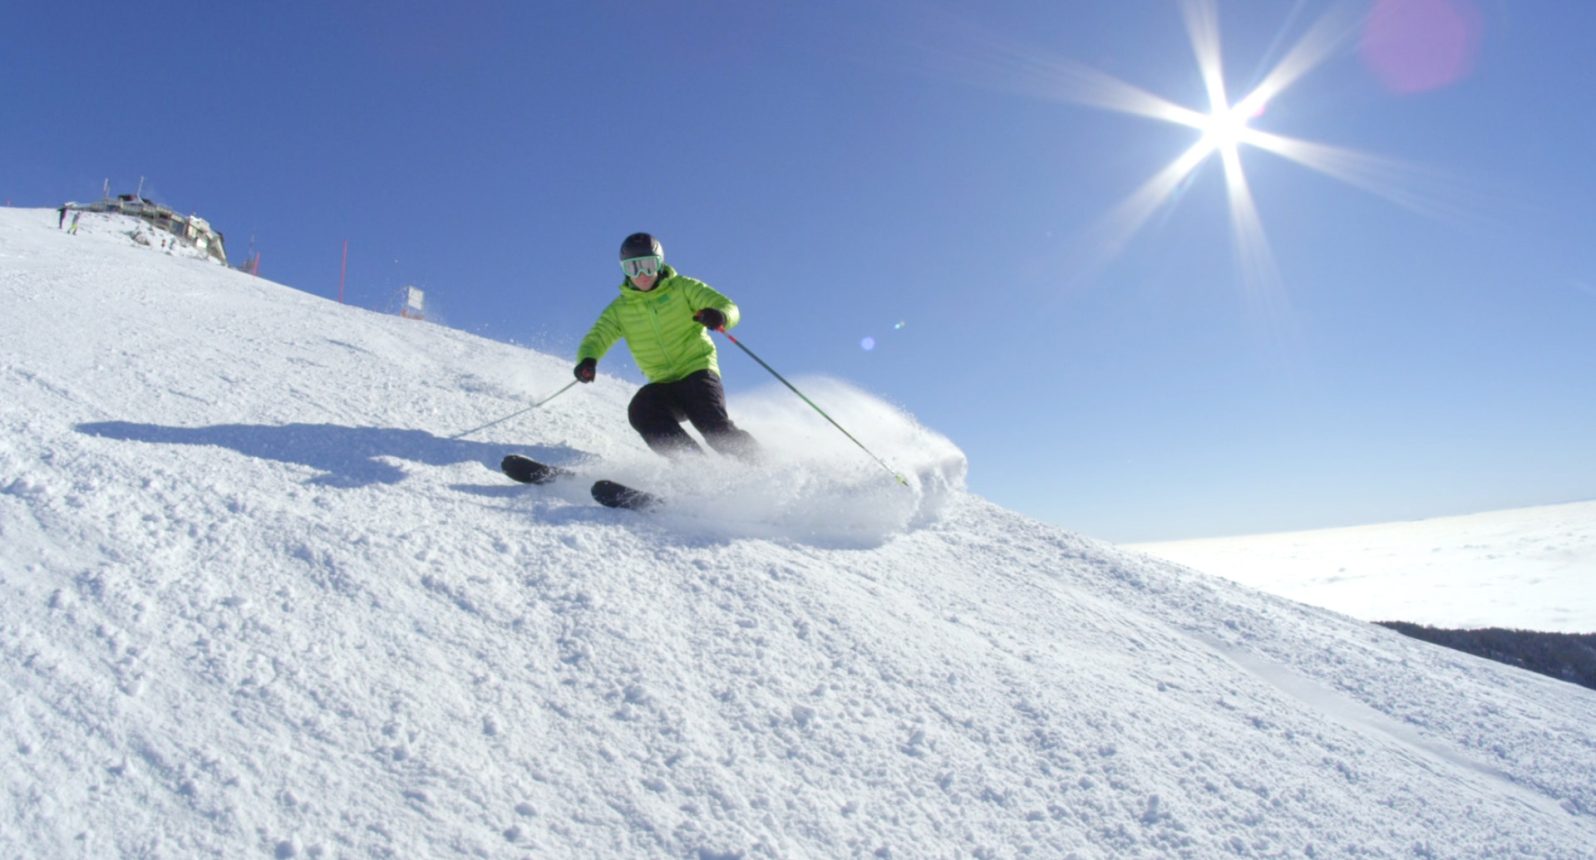 Image of person on skis